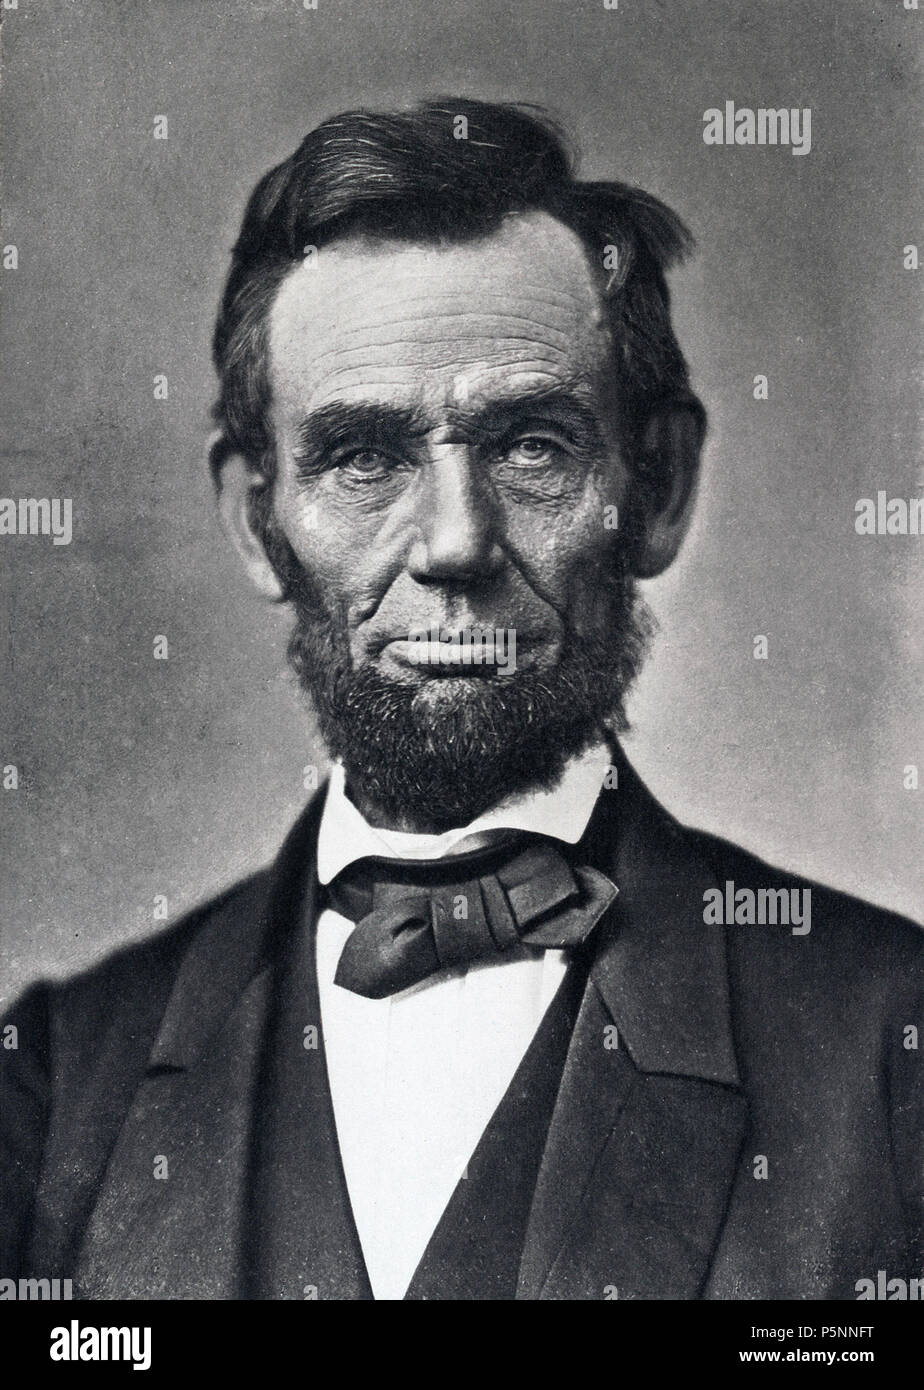 Abraham Lincoln . Scholars and enthusiasts alike believe this portrait of Abraham Lincoln, taken on November 8, 1863, eleven days before his famed Gettysburg Address, to be the best photograph of him ever taken. Lincoln’s character was notoriously difficult to capture in pictures, but Alexander Gardner’s close-up portrait, quite innovative in contrast to the typical full-length portrait style, comes closest to preserving the expressive contours of Lincoln’s face and his penetrating gaze. 8 November 1863. Moses P. Rice, possibly one of Gardner’s former assistants, copyrighted this portrait in t Stock Photo